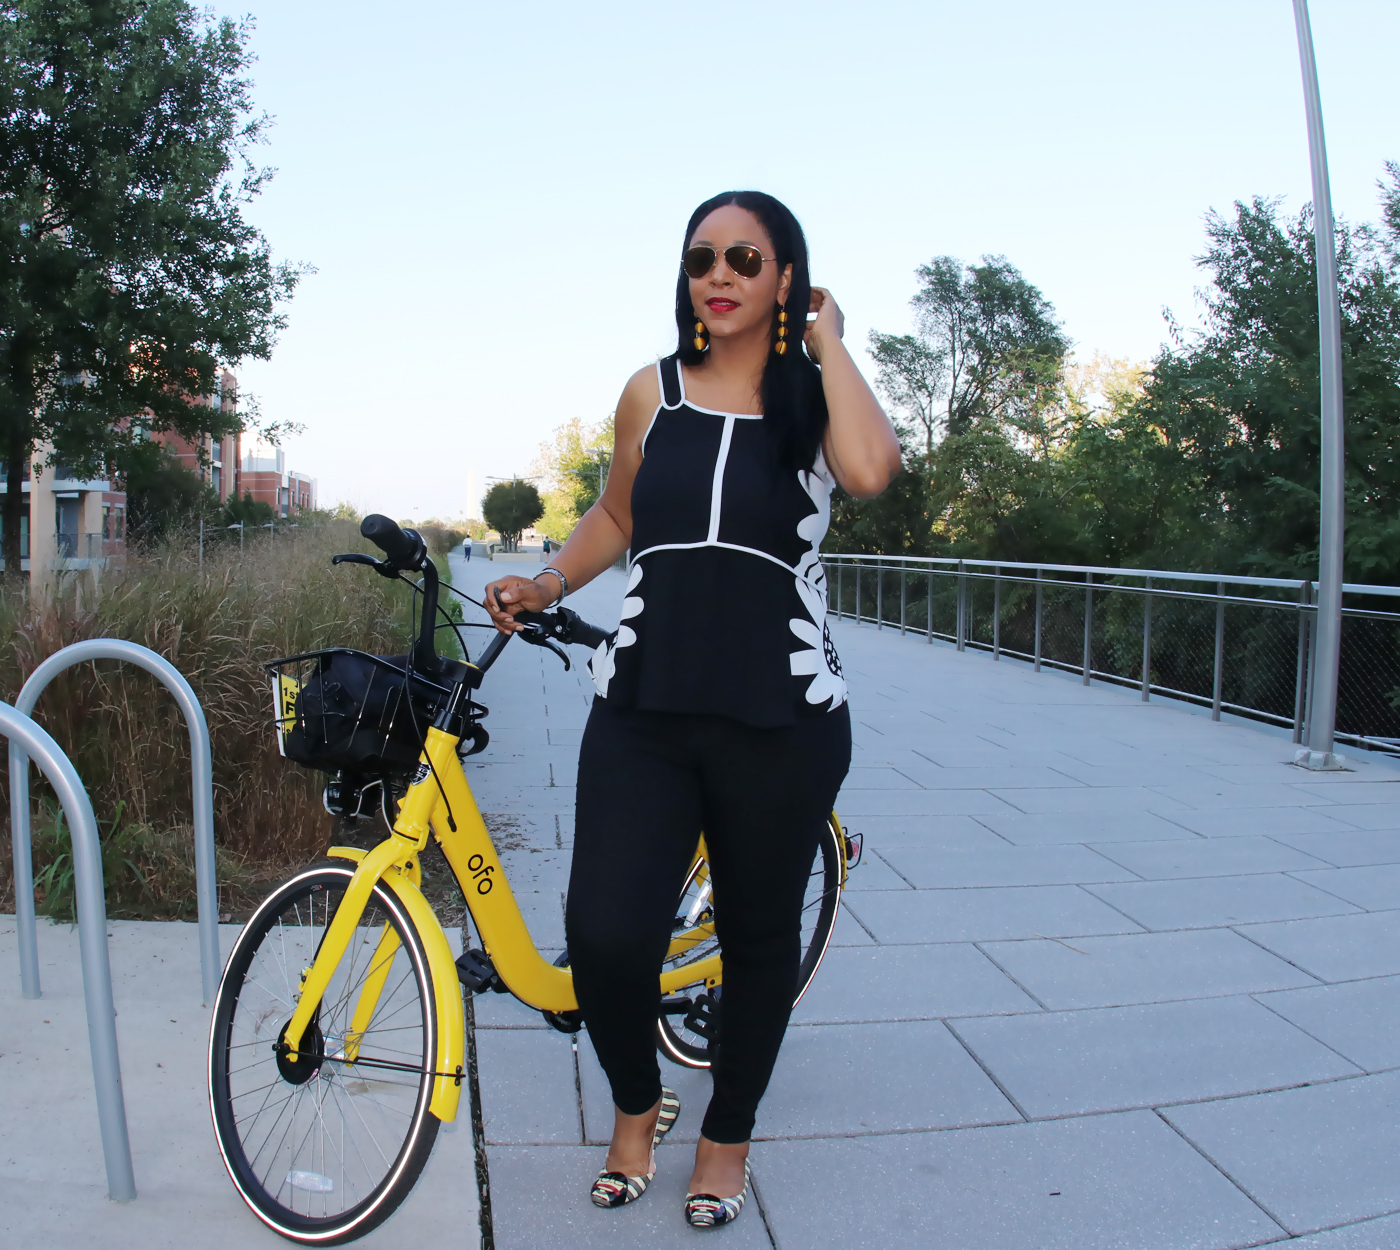 Introducing ofo: My New Fall Ride